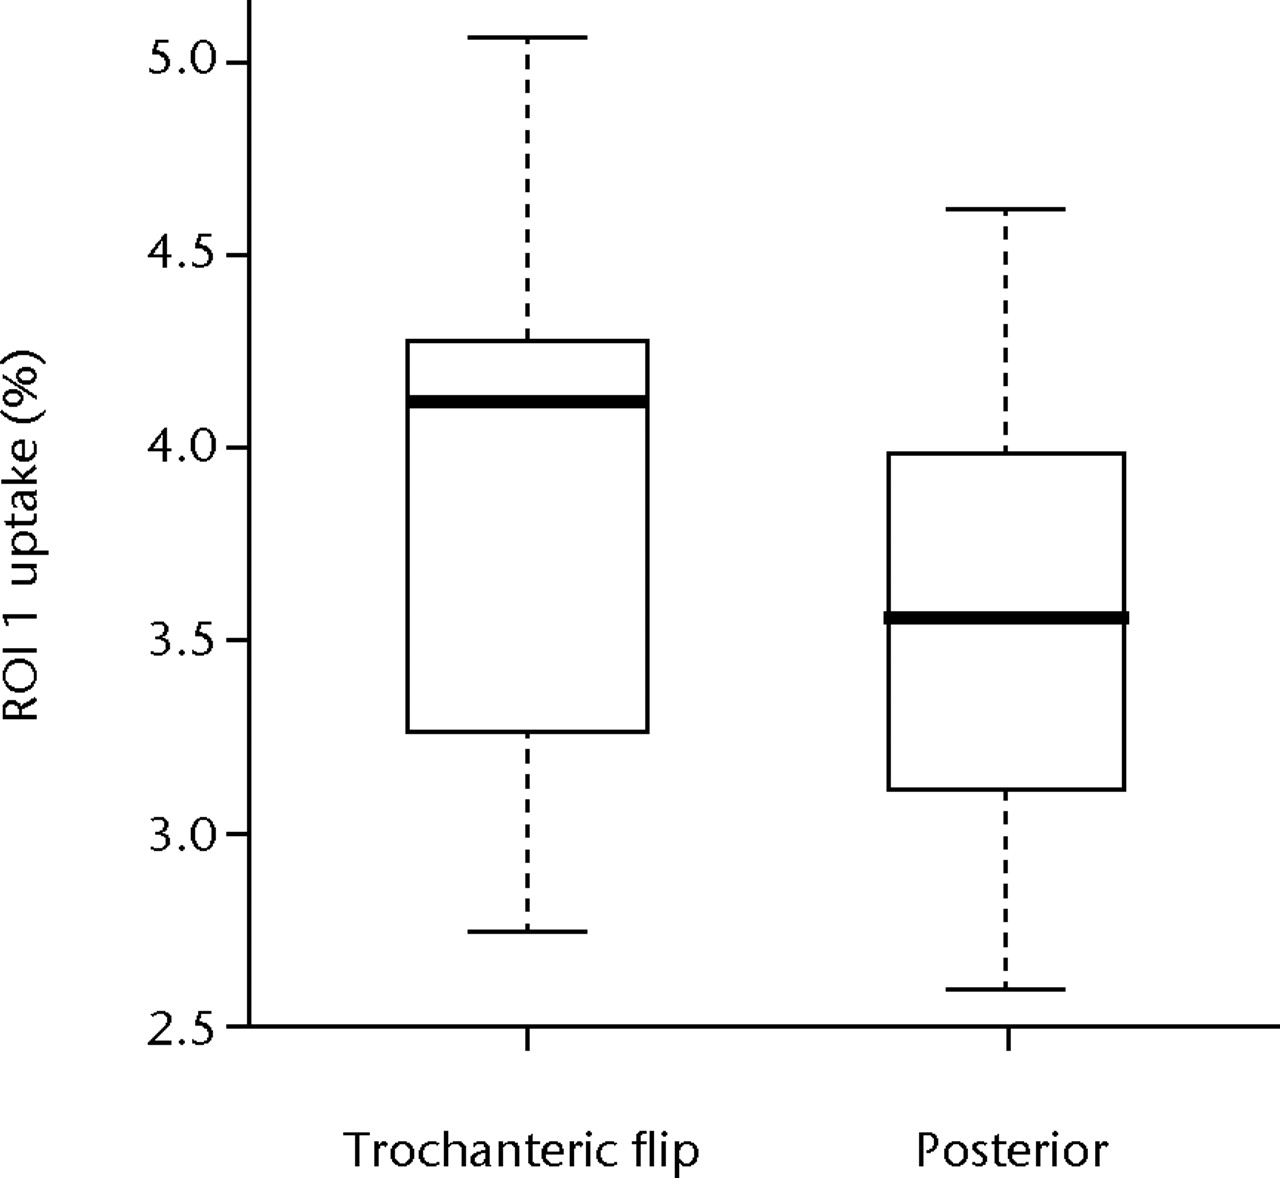 Figs. 4a - 4b 
          Boxplots of radionuclide uptake
for a) region of interest (ROI) 1 and b) ROI 2 for single photon
emission computed tomography (SPECT-CT) image data, both expressed
as a percentage of uptake in ROI 3, for each surgical approach (trochanteric
flip and posterior). The boxes represent the median and interquartile
range (IQR), the whiskers denote 1.5×IQR and ° denotes outliers.
        